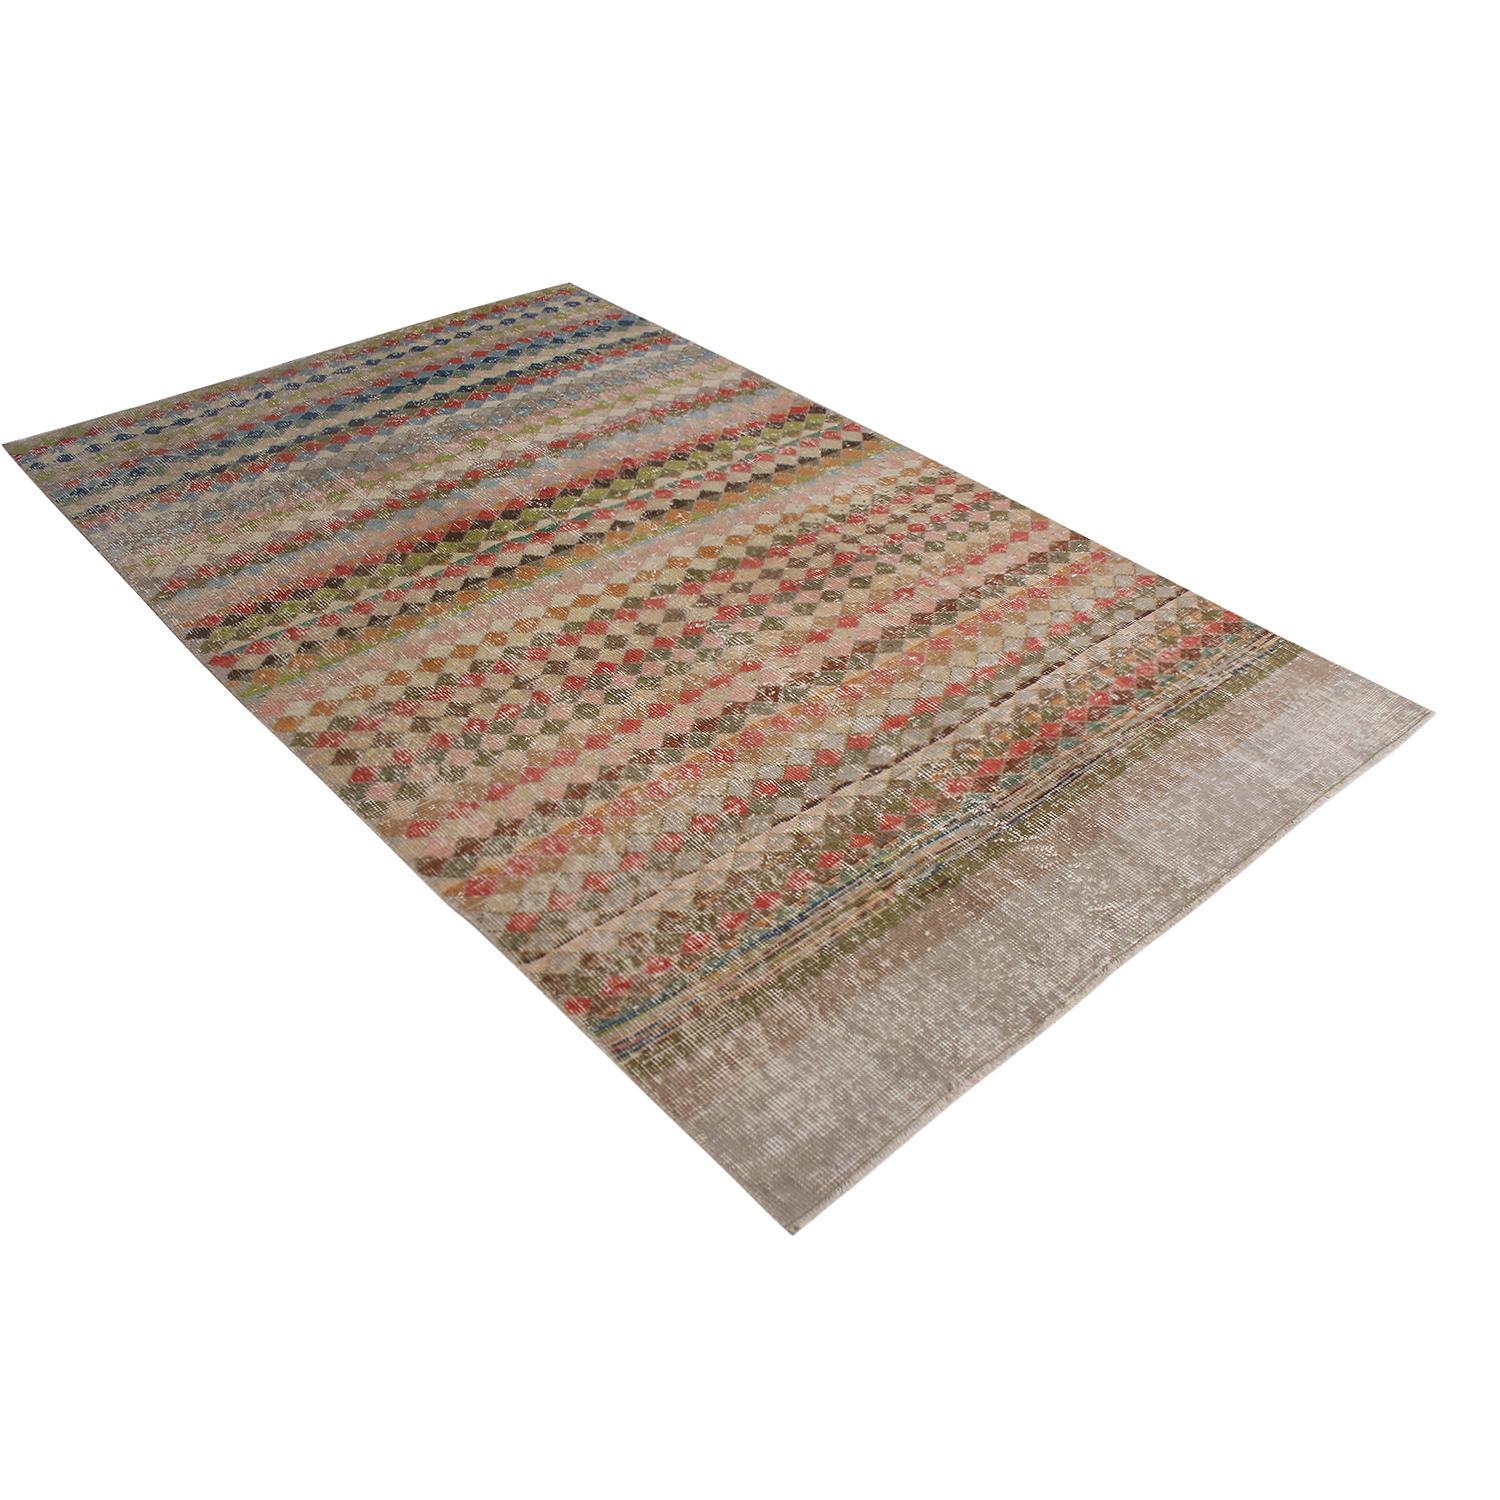 Hand knotted in Turkey originating between 1960-1970, this vintage mid-century runner is the latest to join Rug & Kilim’s midcentury Pasha collection, celebrating Turkish icon and multidisciplinary designer Zeki Müren with Josh’s handpicked